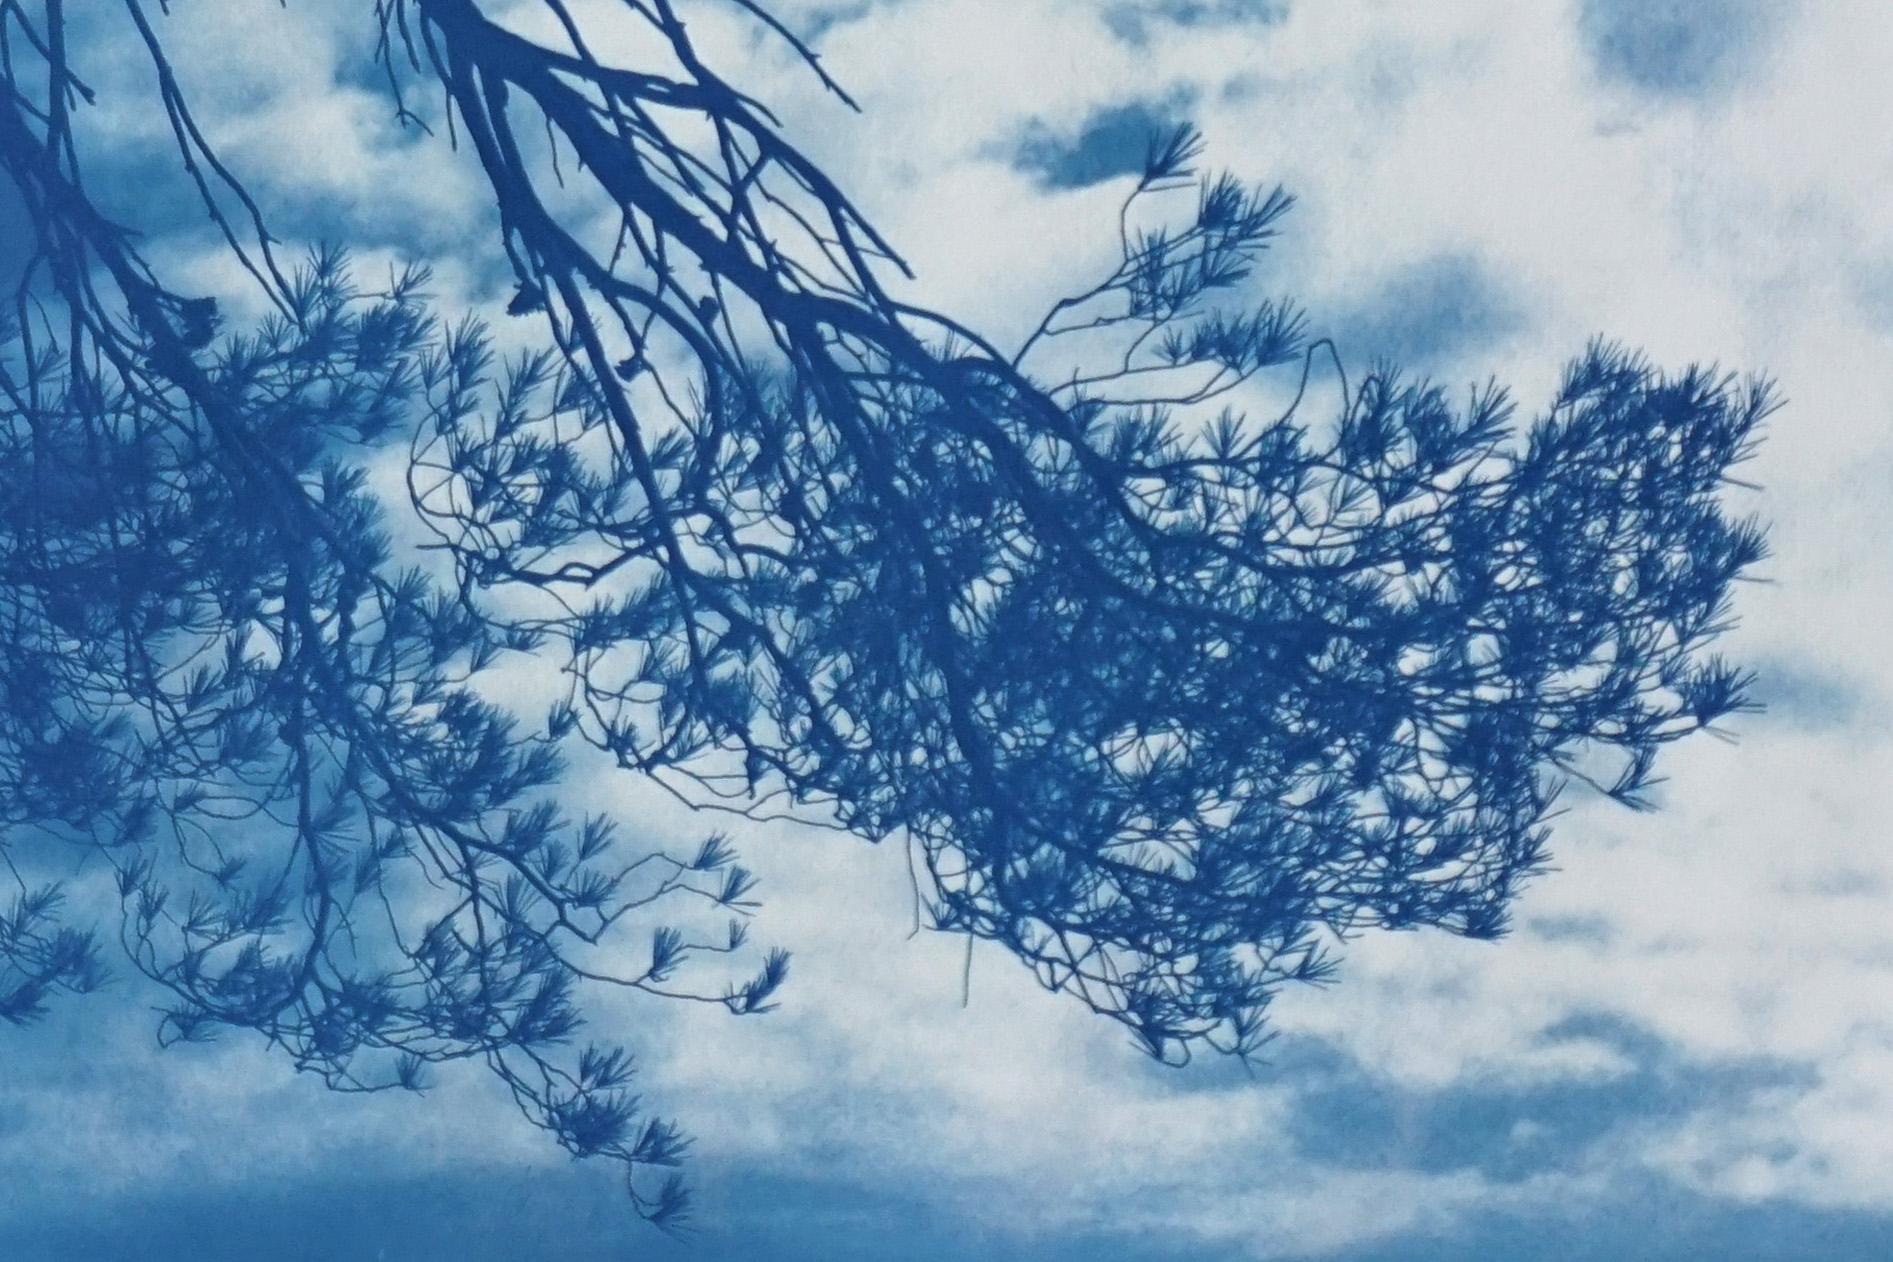 This is an exclusive handprinted limited edition cyanotype.
Stunning image of a breezy 